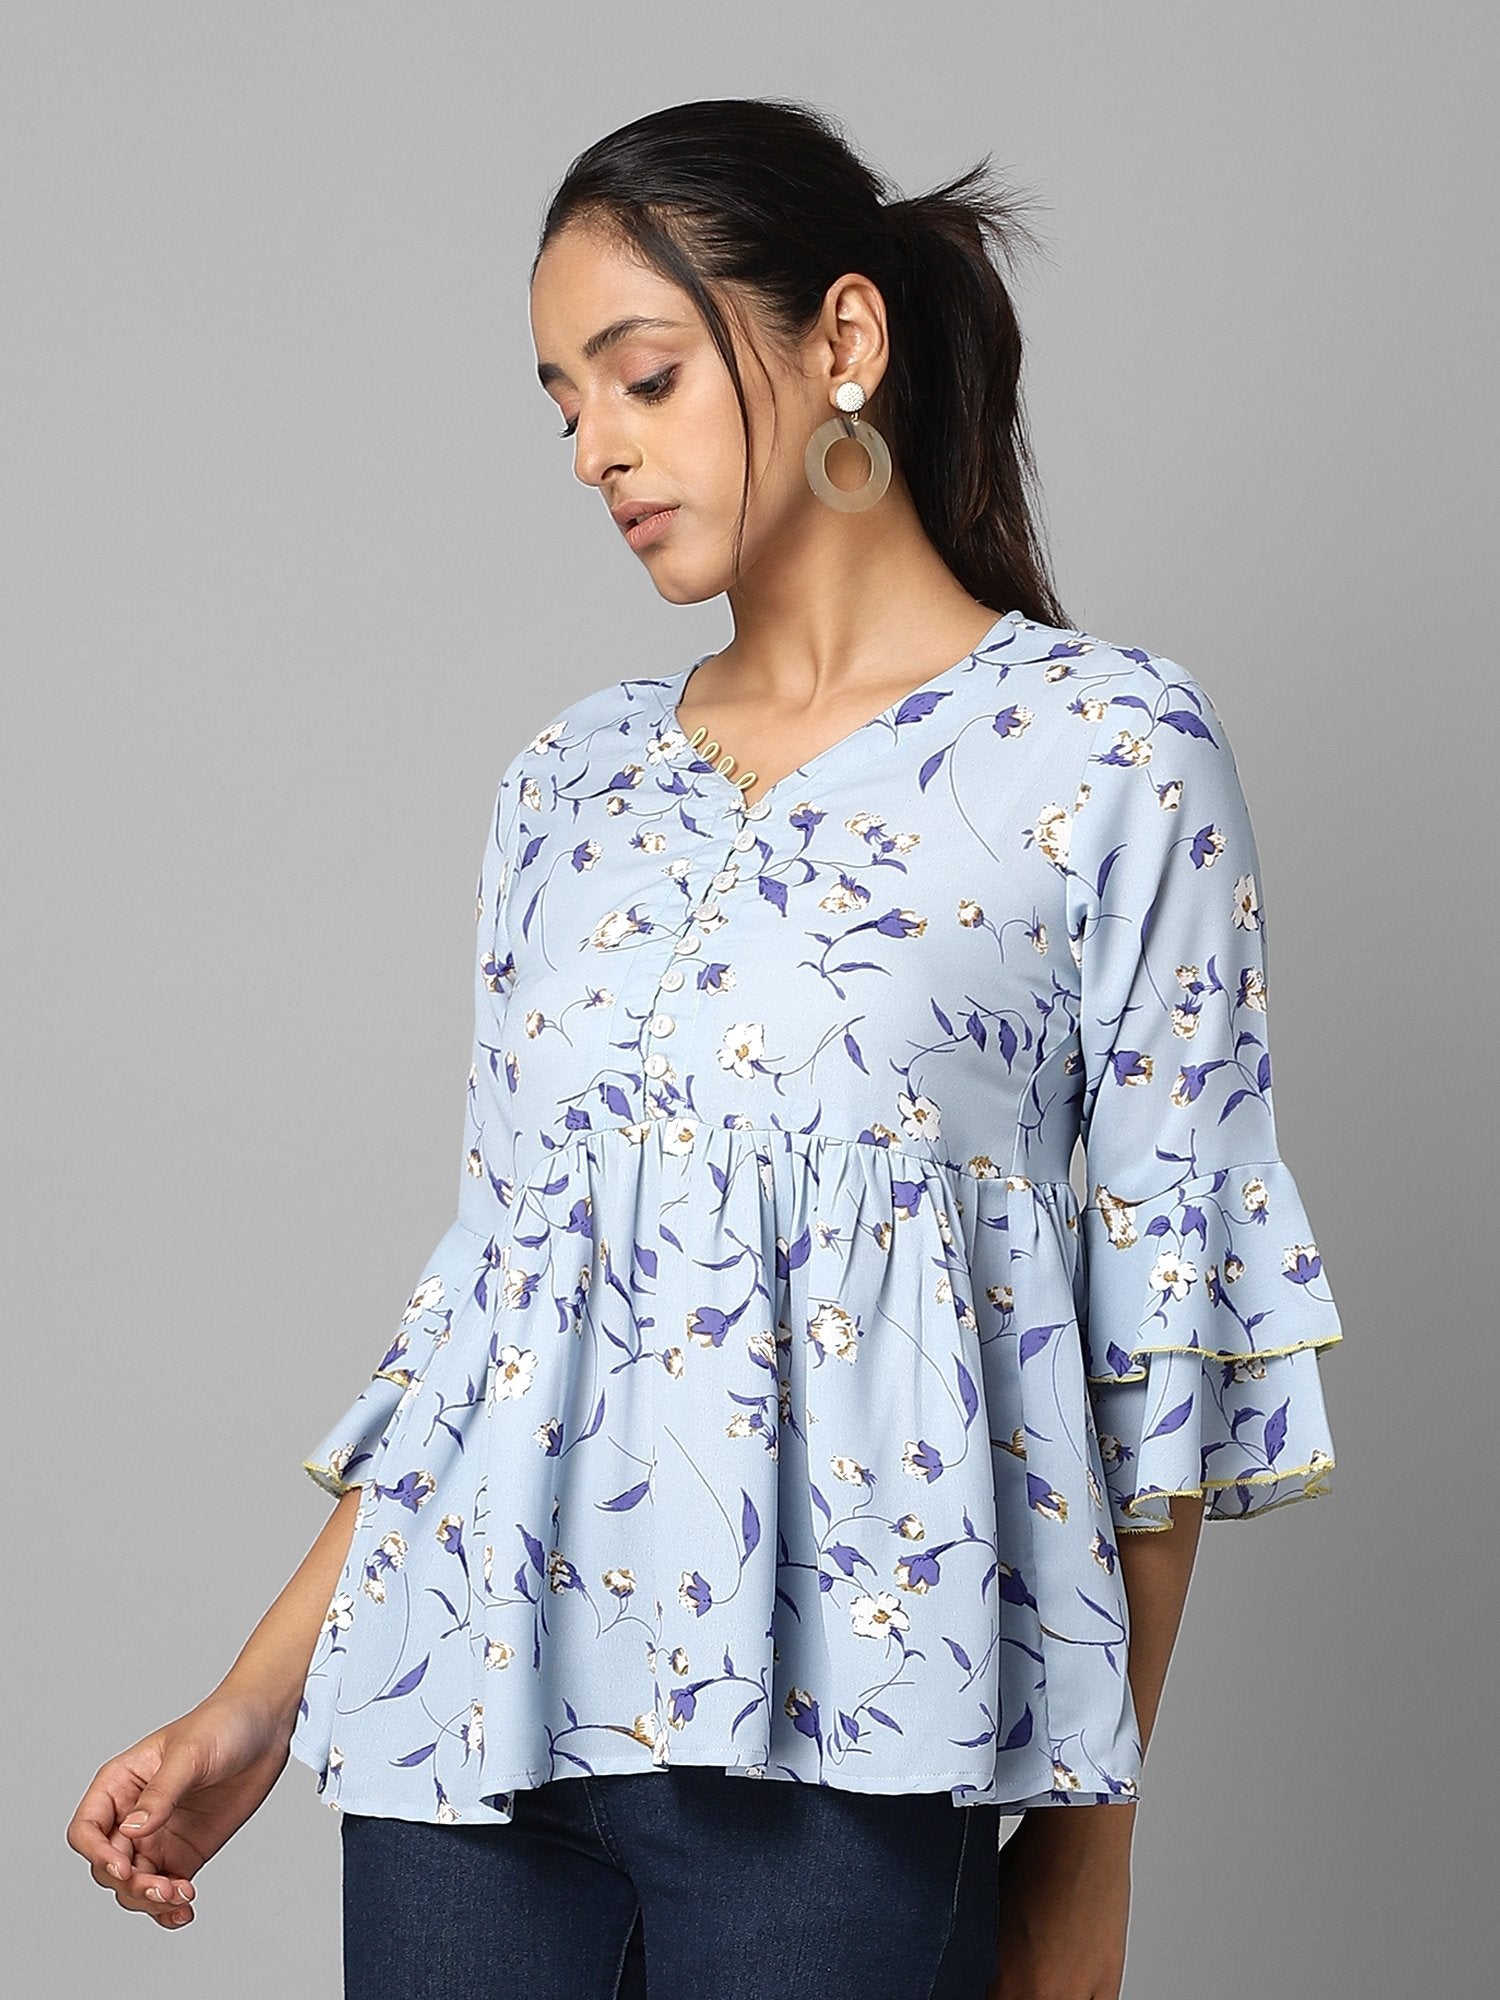 Women's Sky Blue Floral Printed Gathered Top - Azira